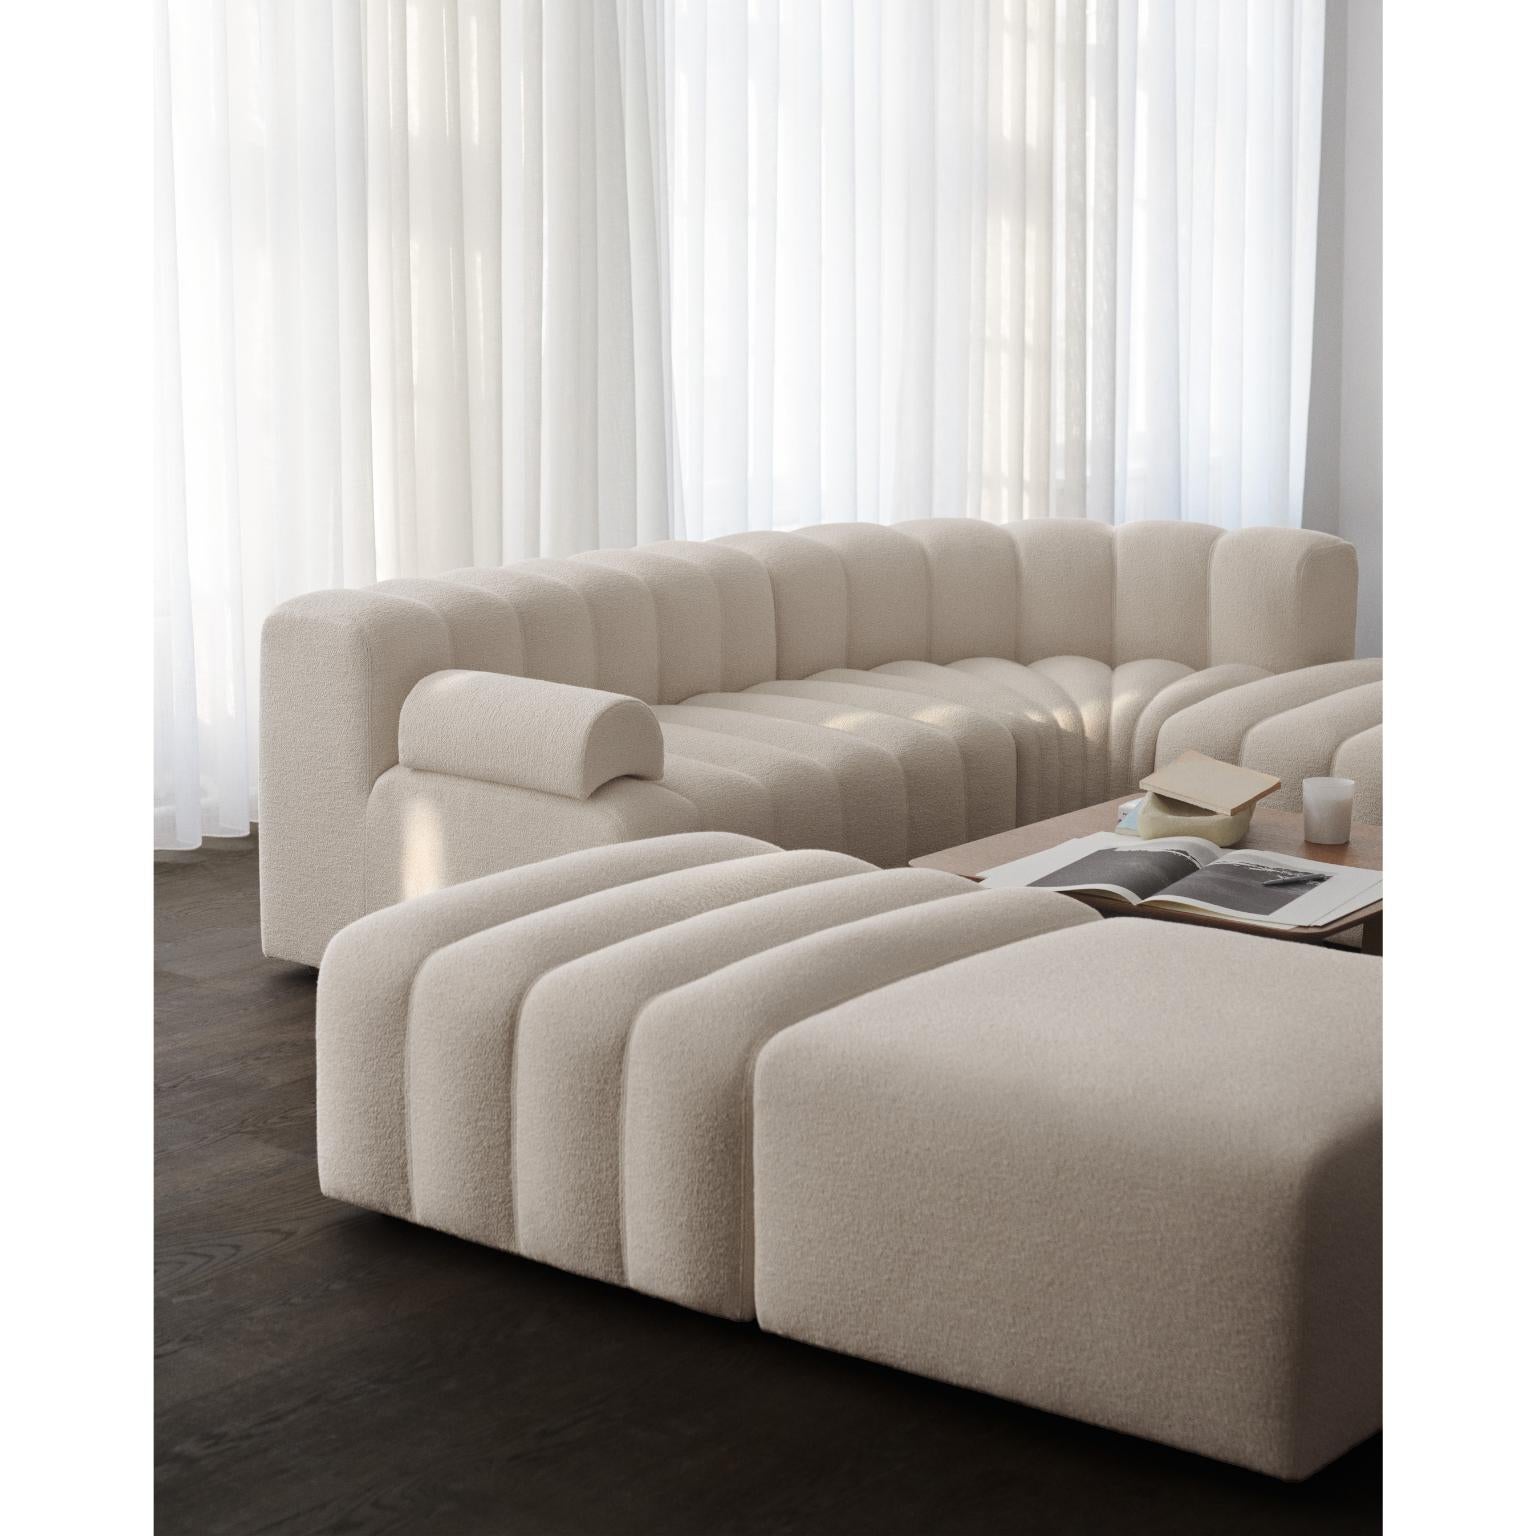 Other Studio Lounge Medium Modular Sofa by NORR11 For Sale